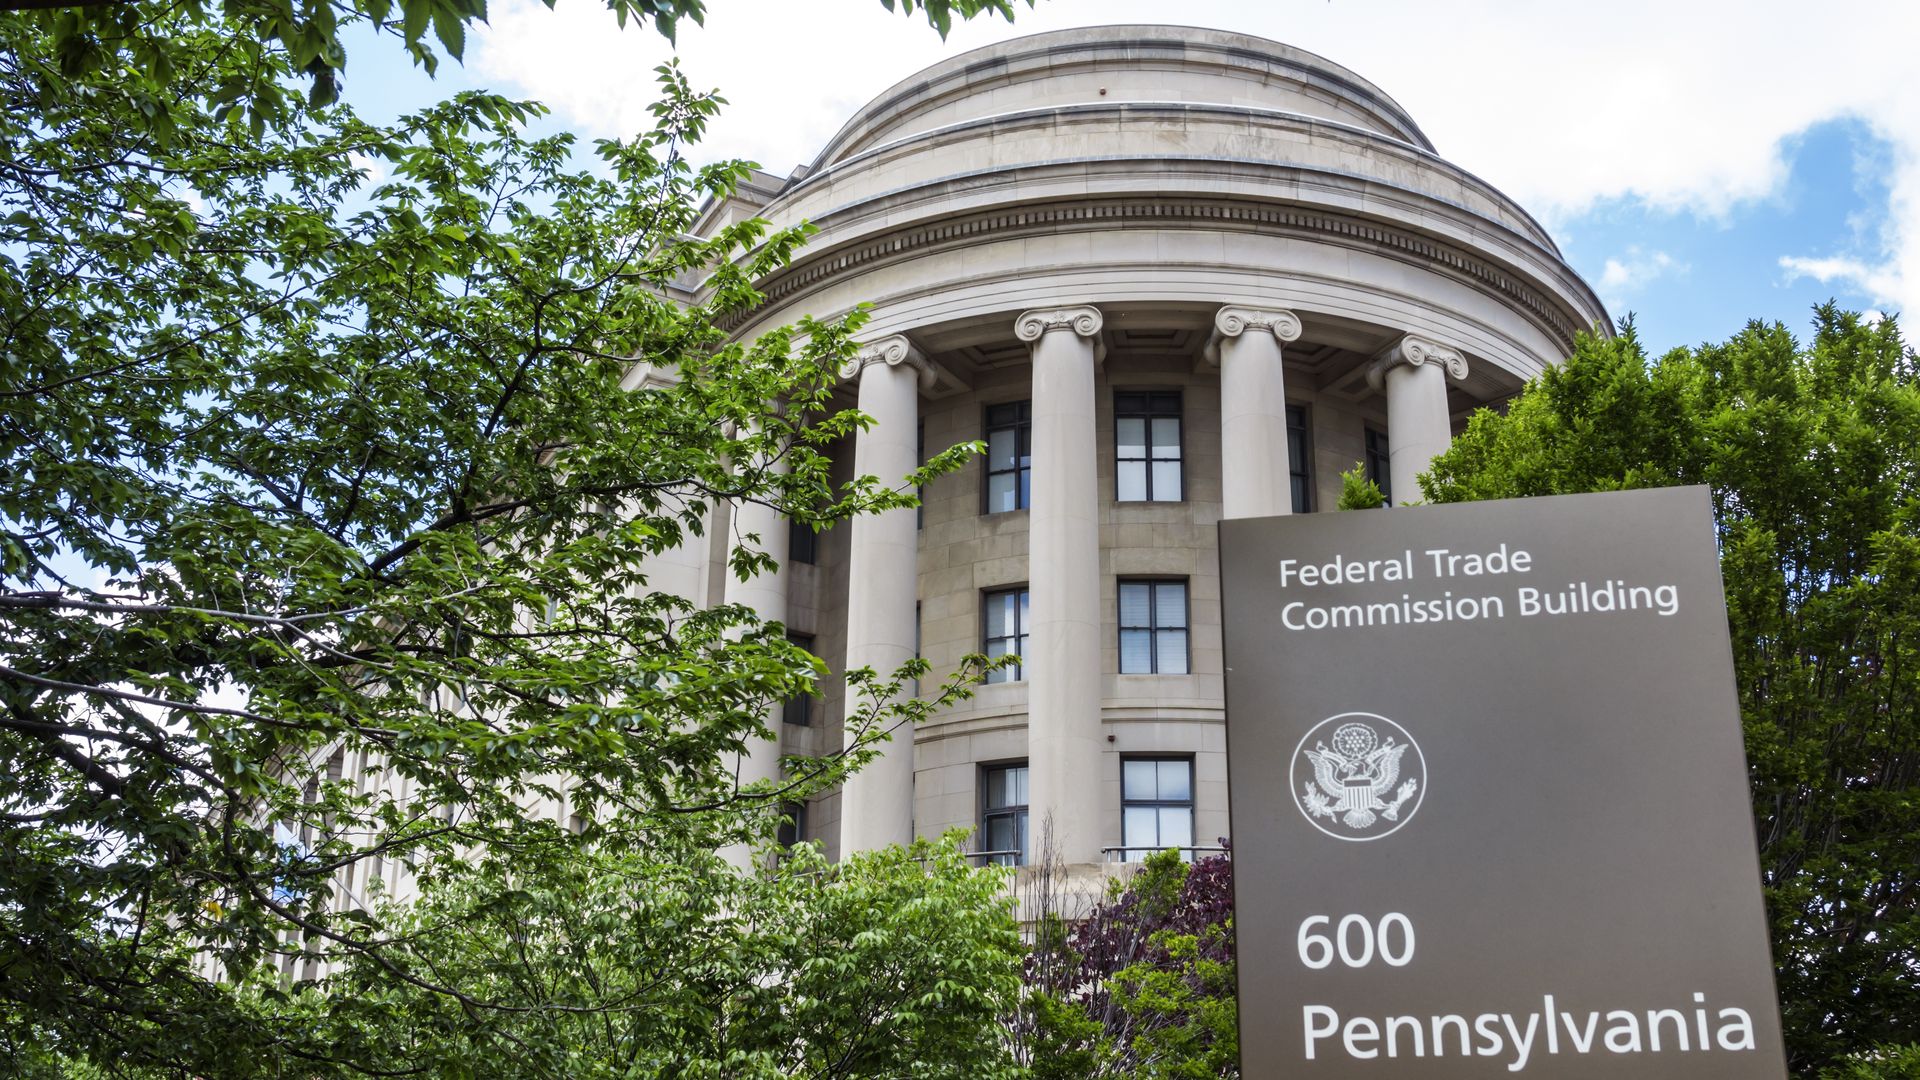 The Federal Trade Commission building in Washington D.C.